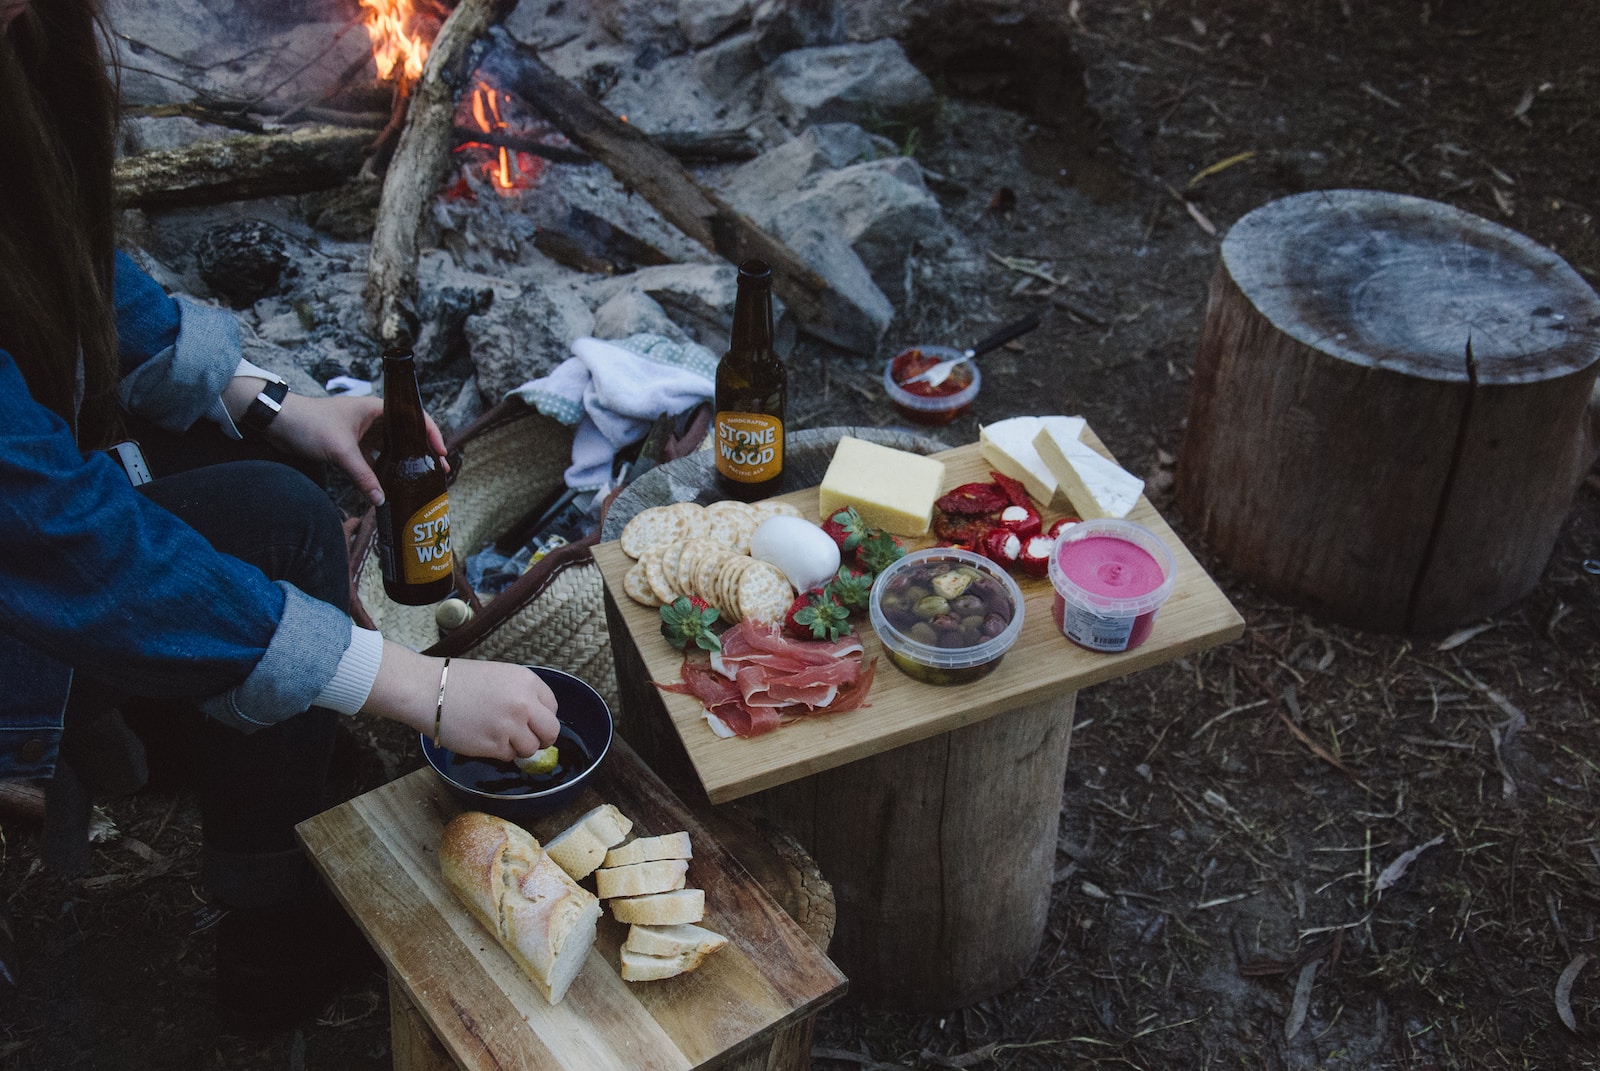 No-Cook Camping Food Ideas